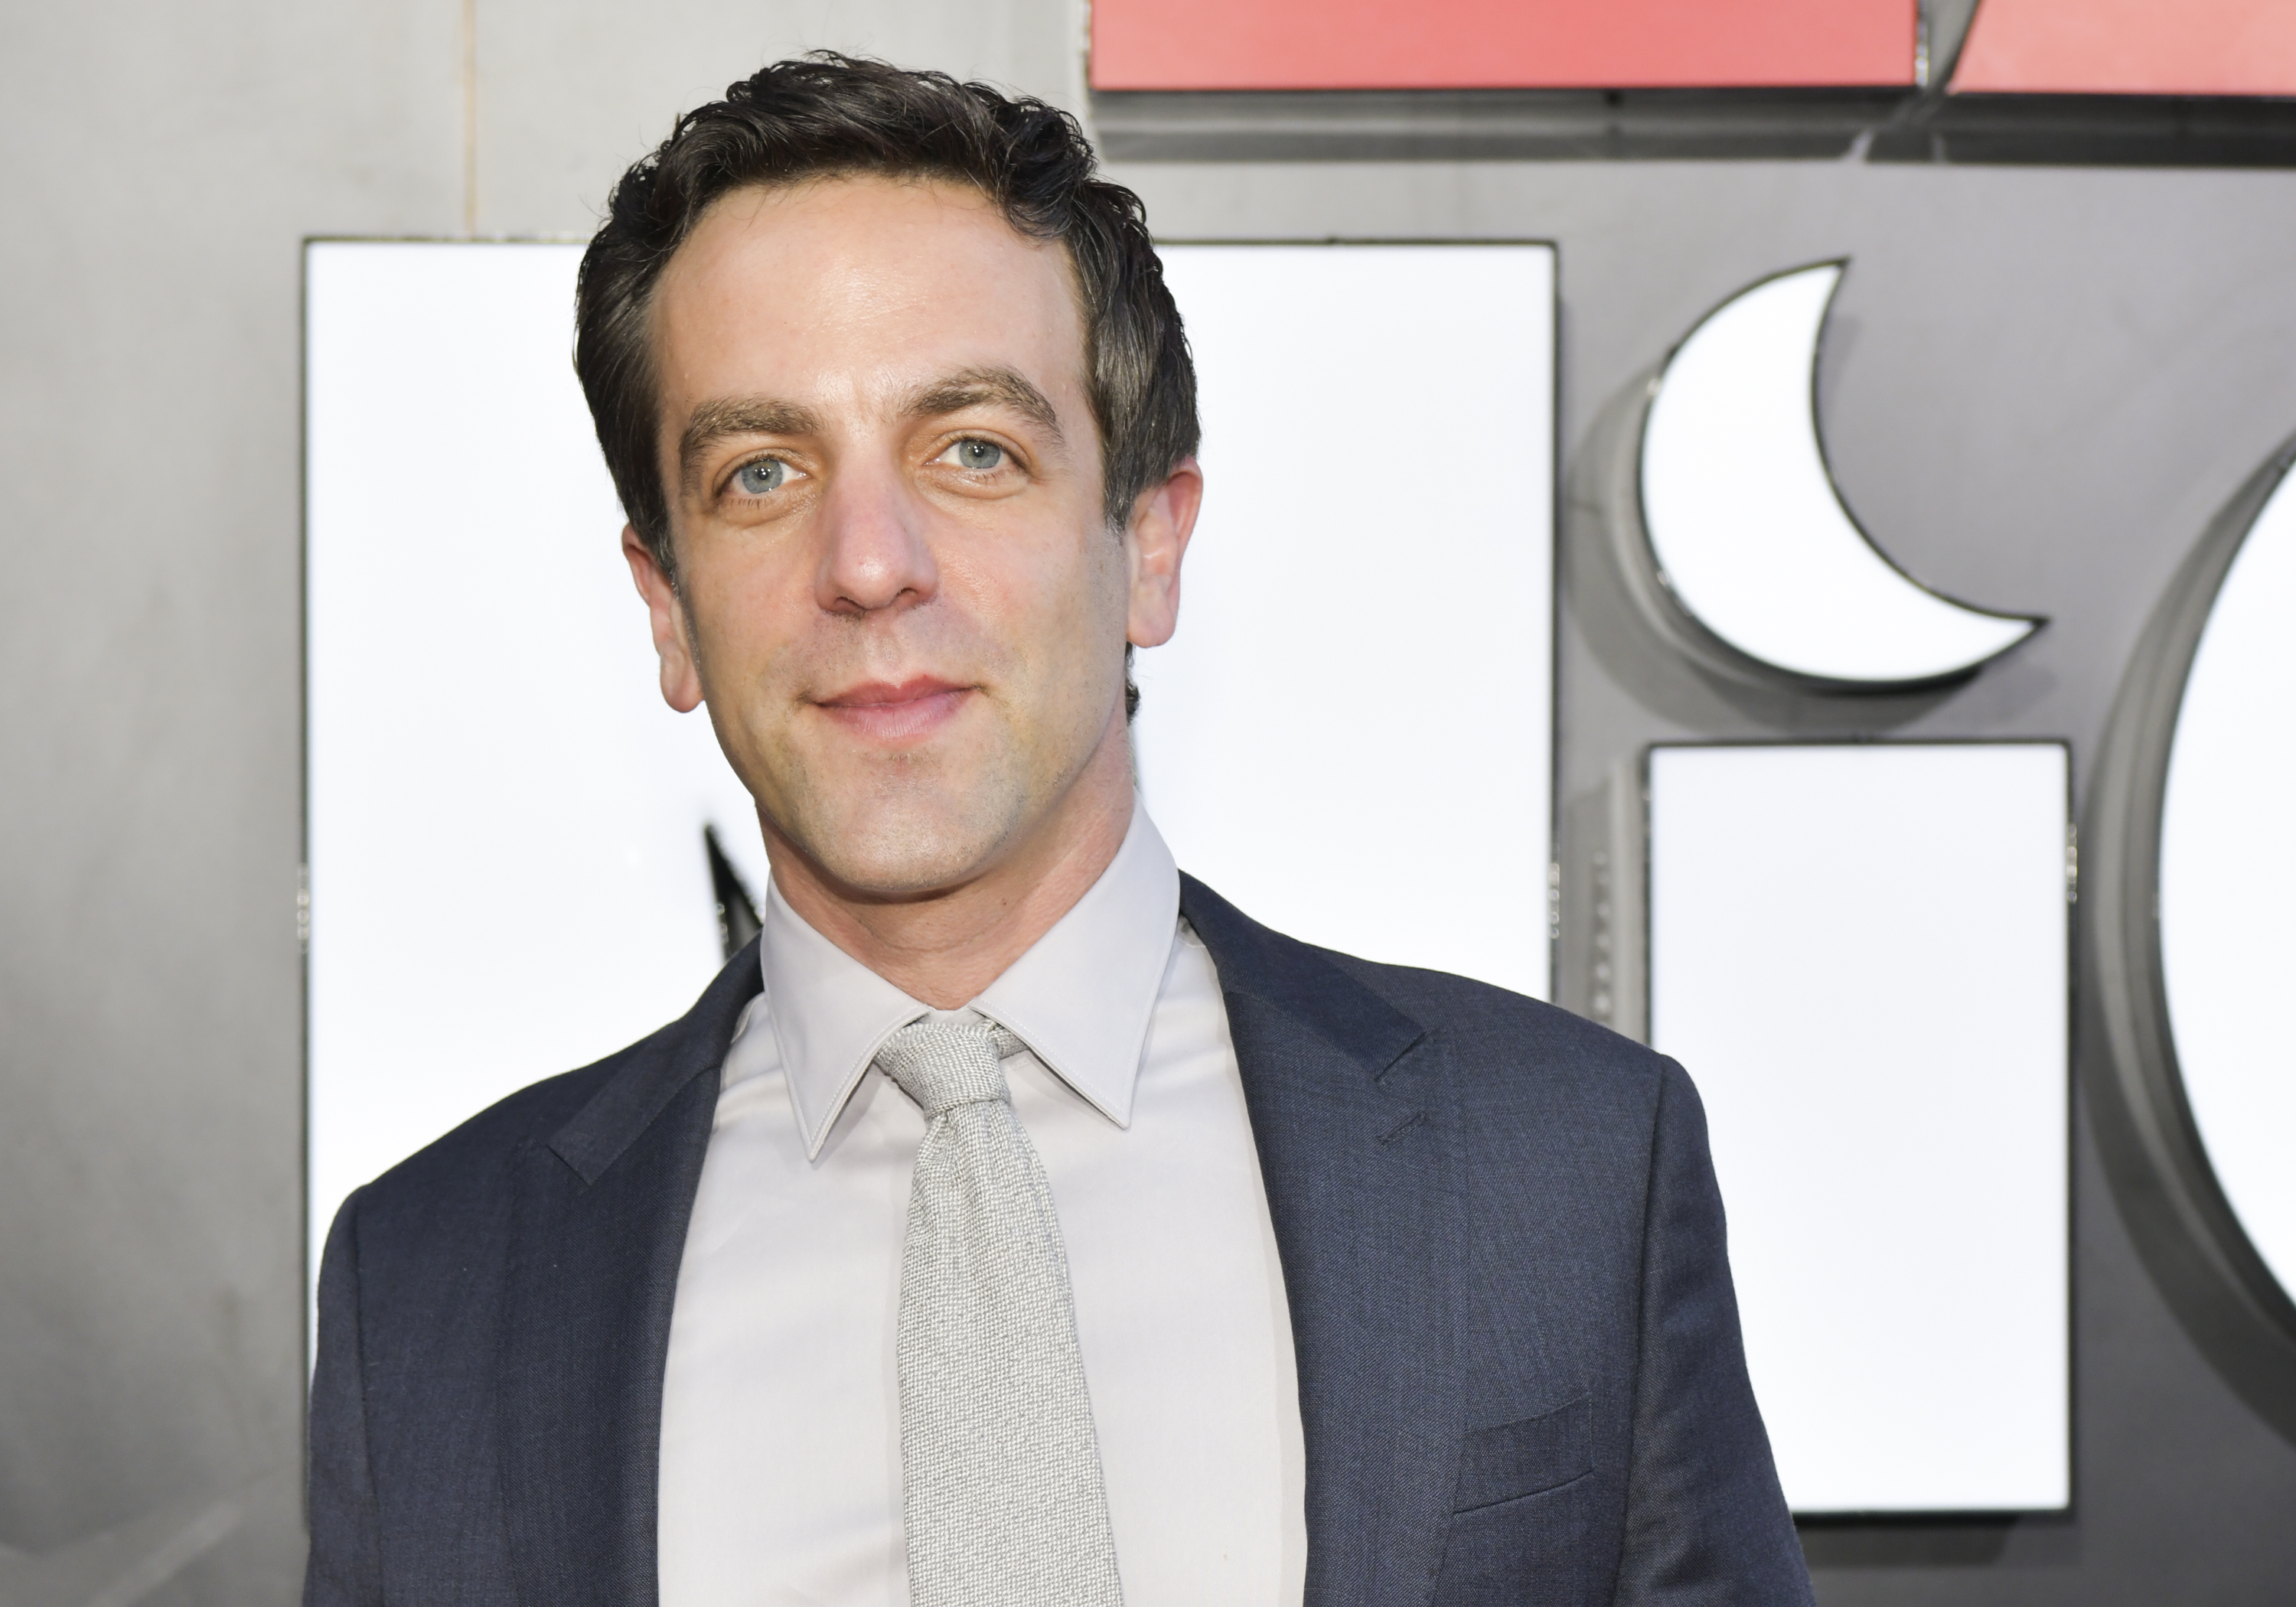 B.J. Novak smiles for a photo. He is wearing a suit and grey tie.